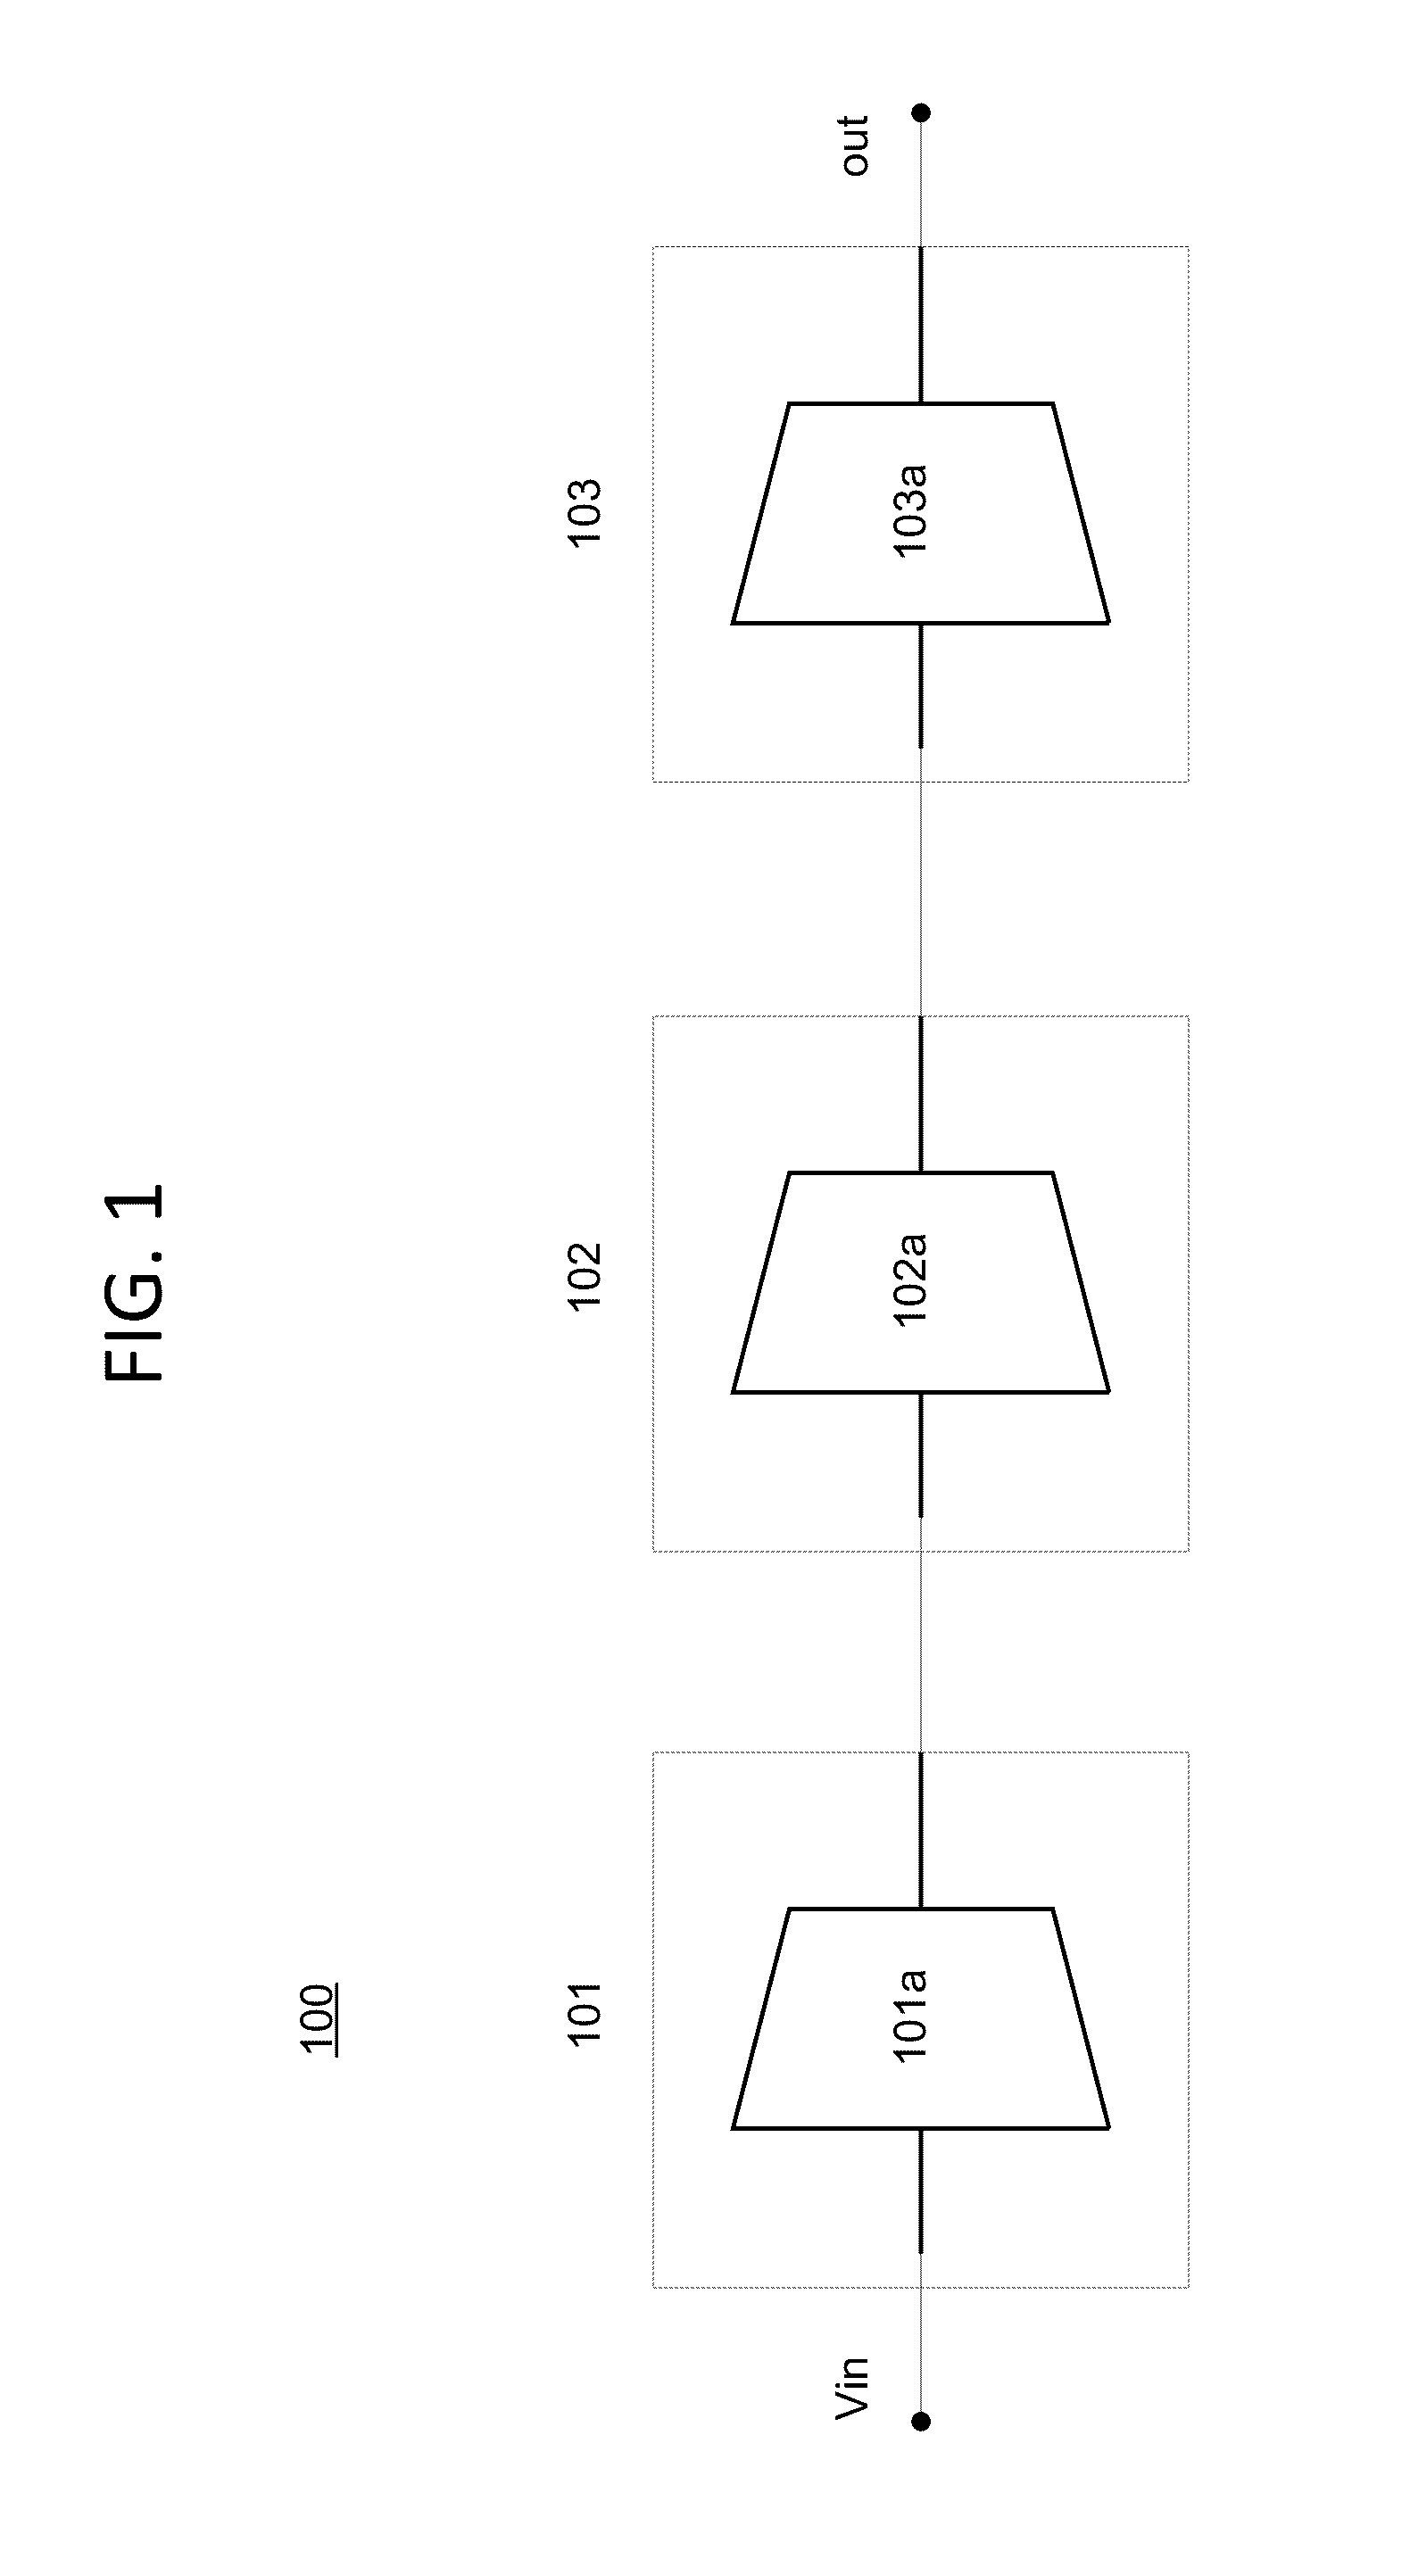 Implicit feed-forward compensated op-amp with split pairs